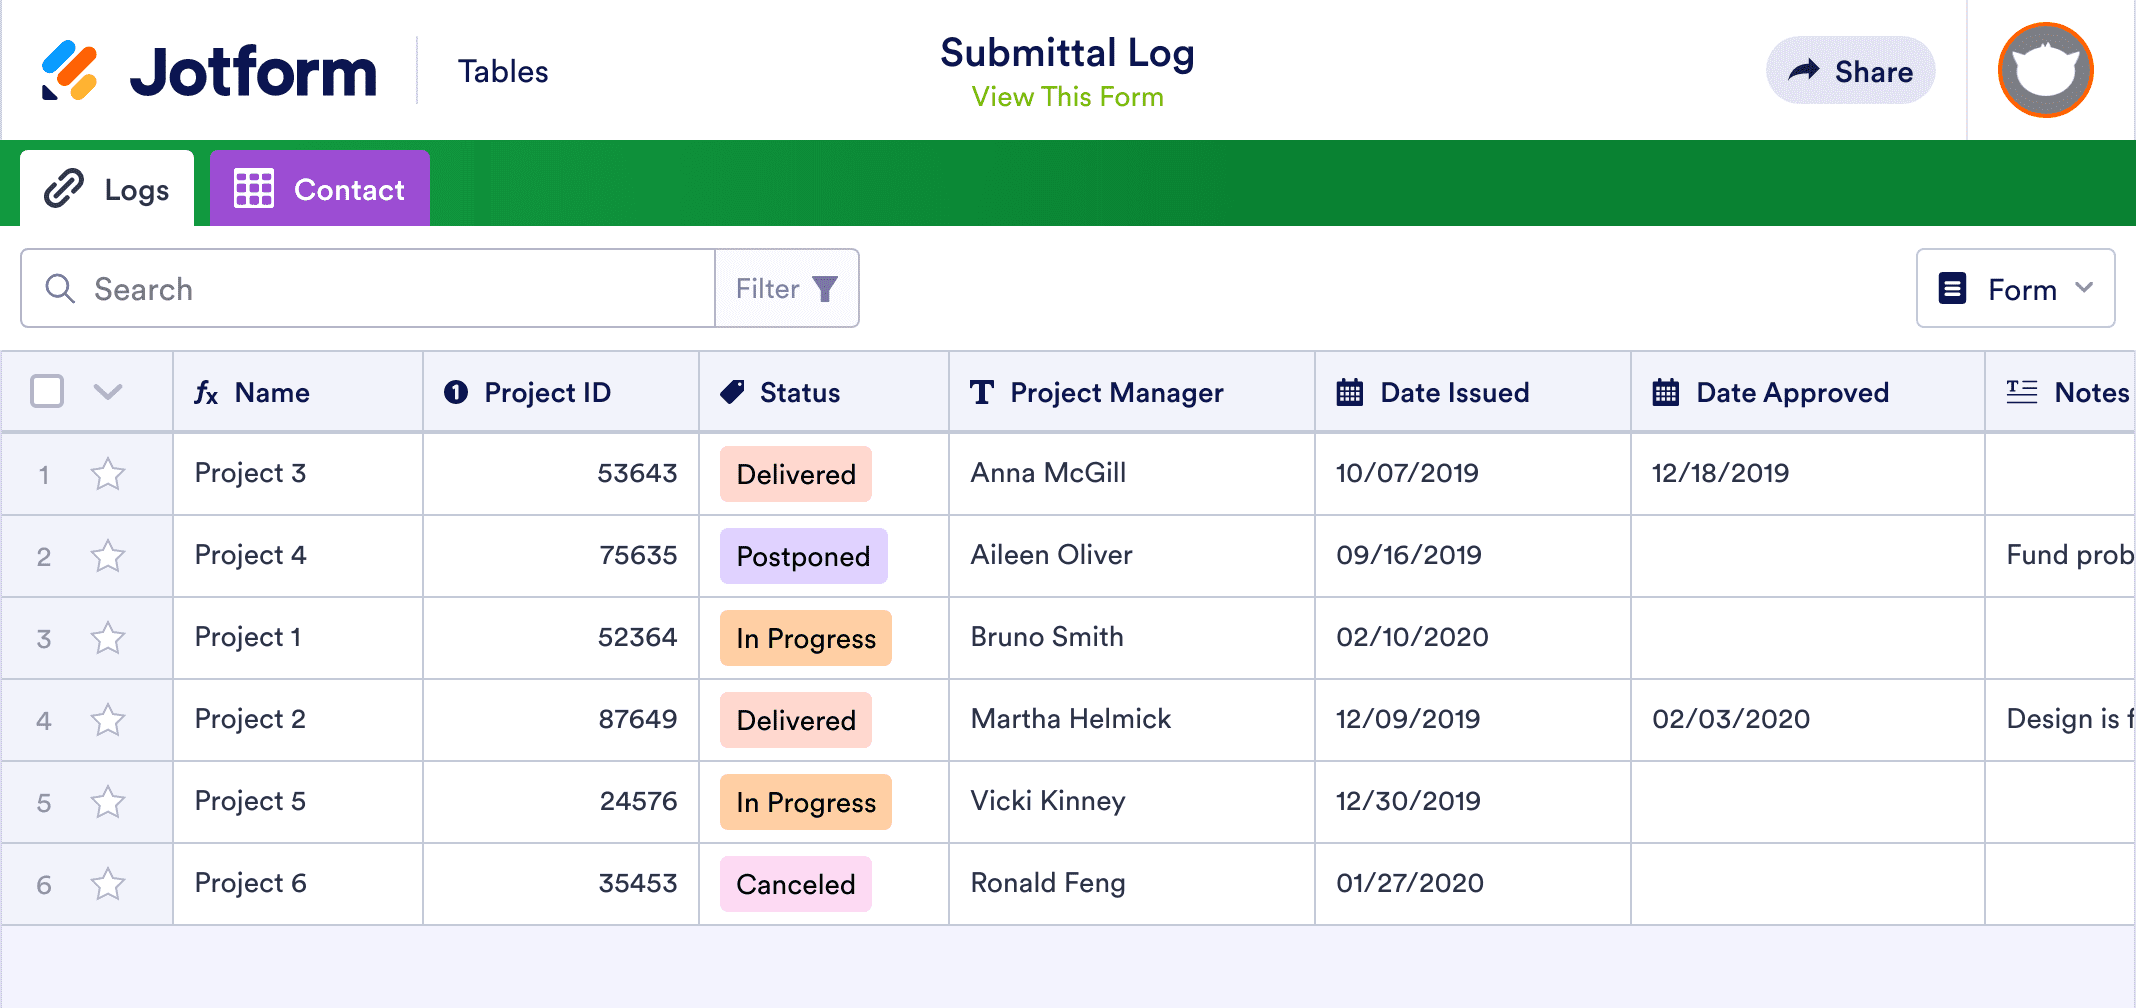 Submittal Log